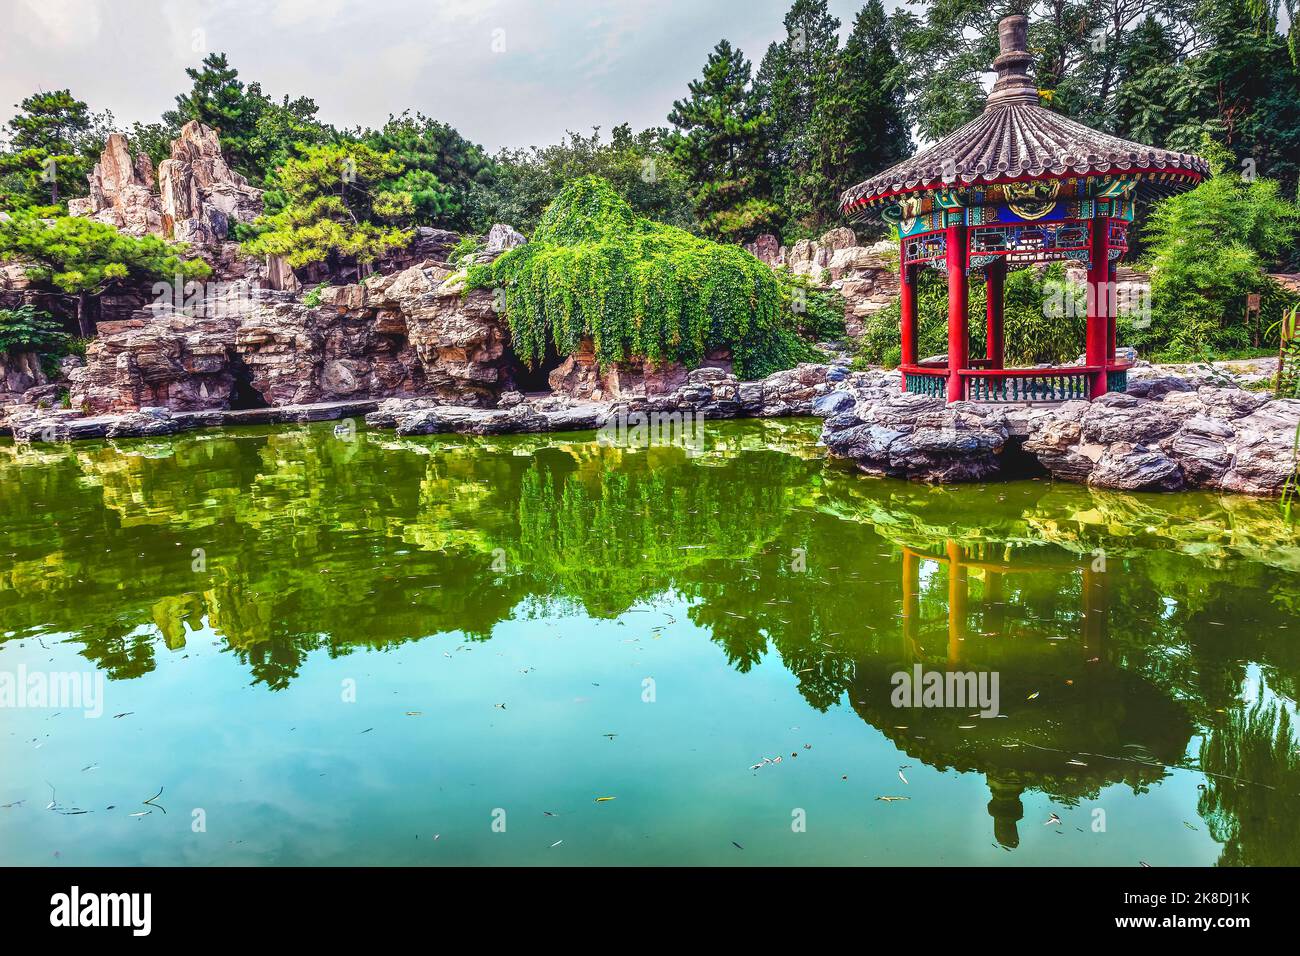 Red Pavilion Rock Garden Water Pond Reflection Temple of Sun City Park, Beijing, China Willow Green Trees Stock Photo